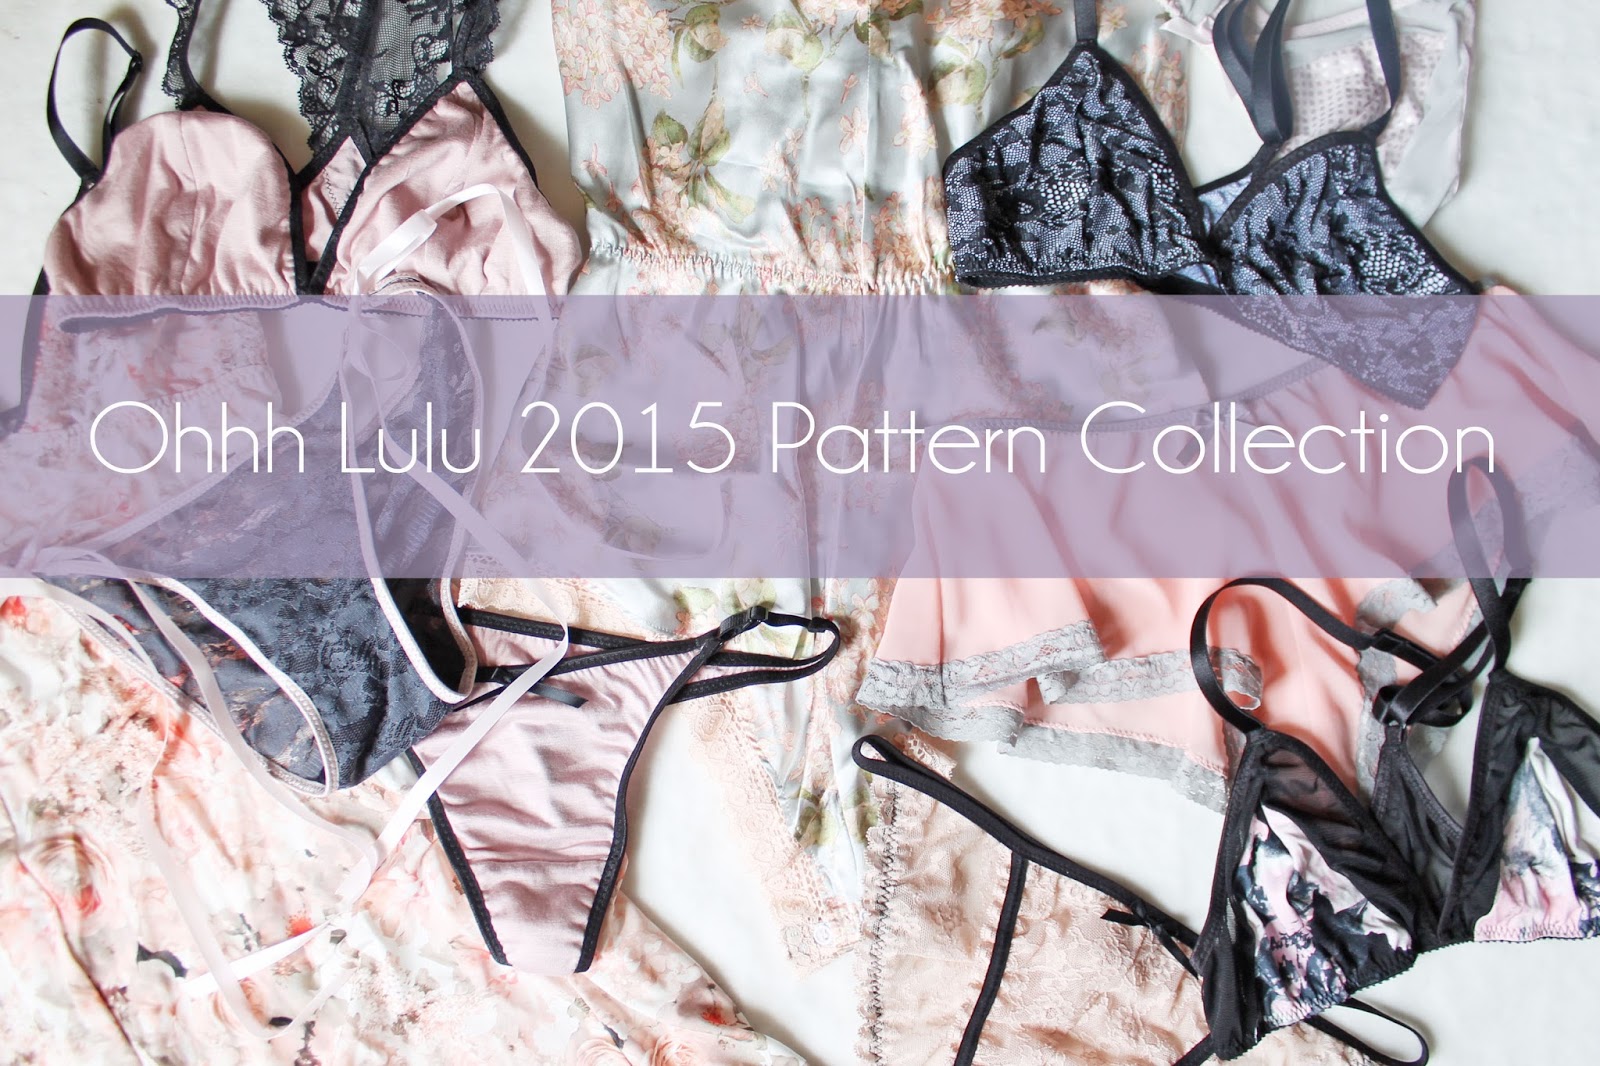 New Pattern Collection – Ohhh Lulu